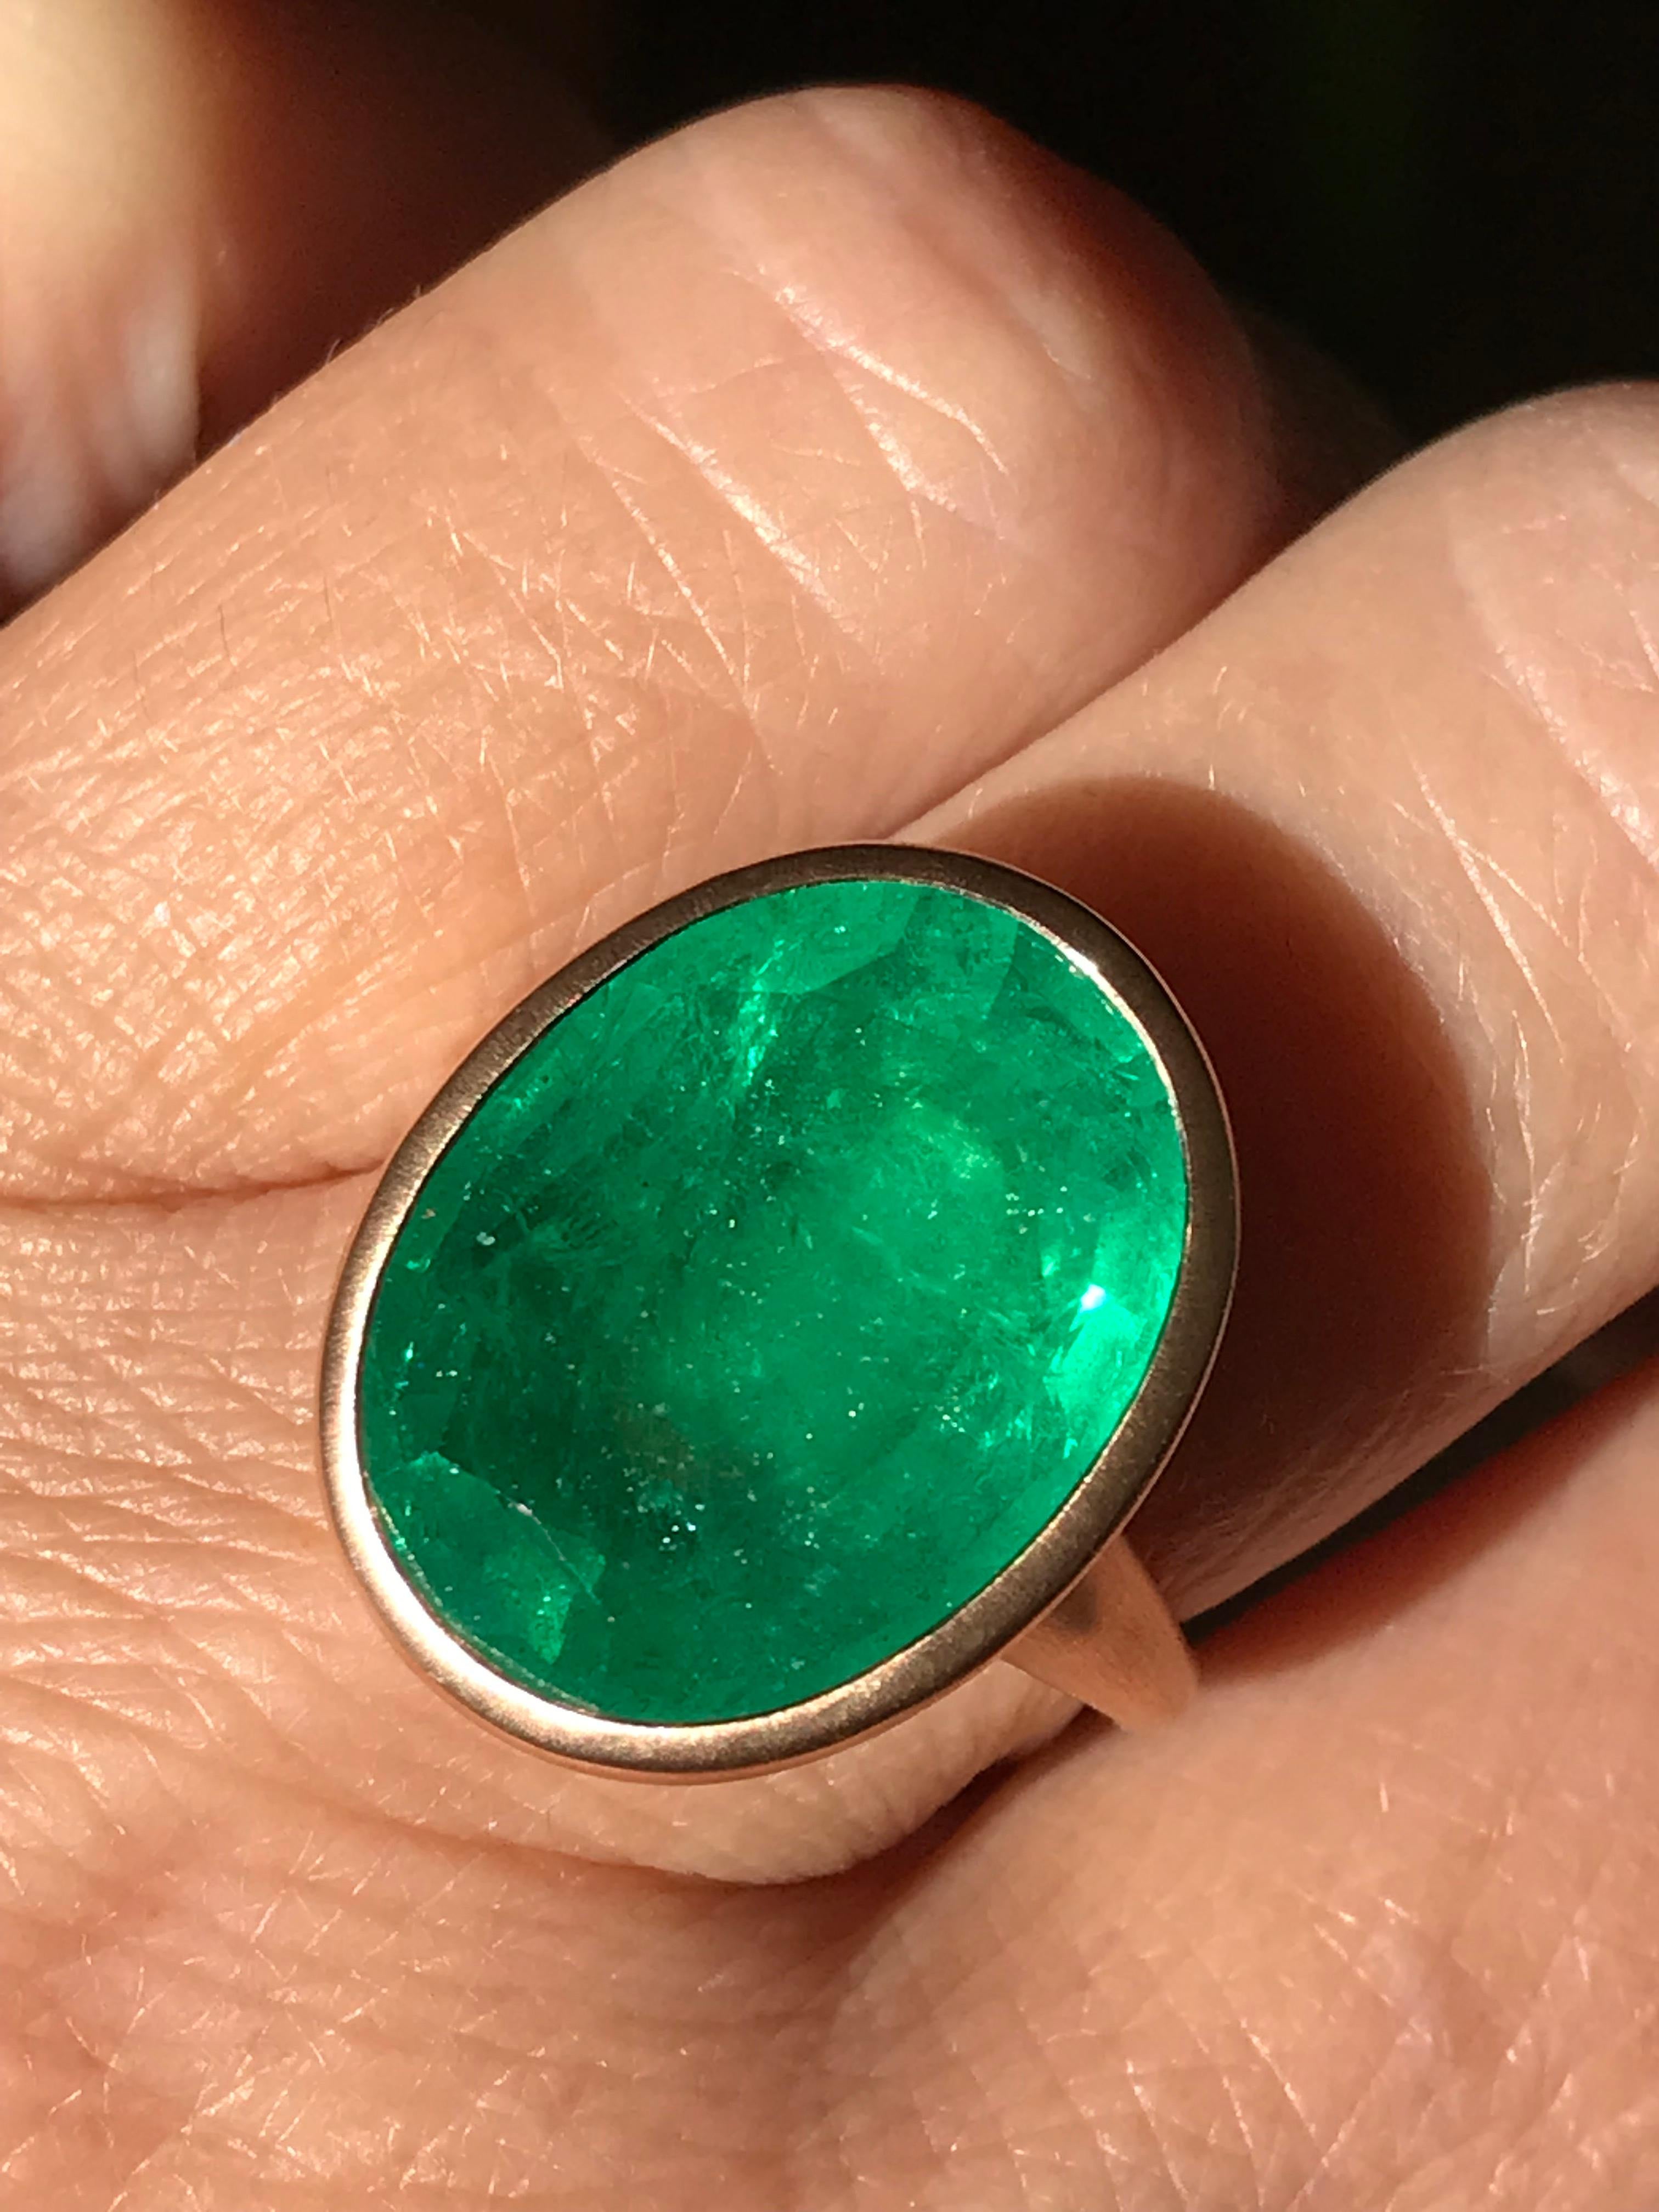 Dalben design One of a Kind 18k rose gold satin finishing ring with a magnificent 13,11 carat bezel-set oval faceted cut emerald. 
The emerald is accompanied by IGI (Italian Gemological Institute ) International Certificate.
Ring size 7 1/4 USA - EU